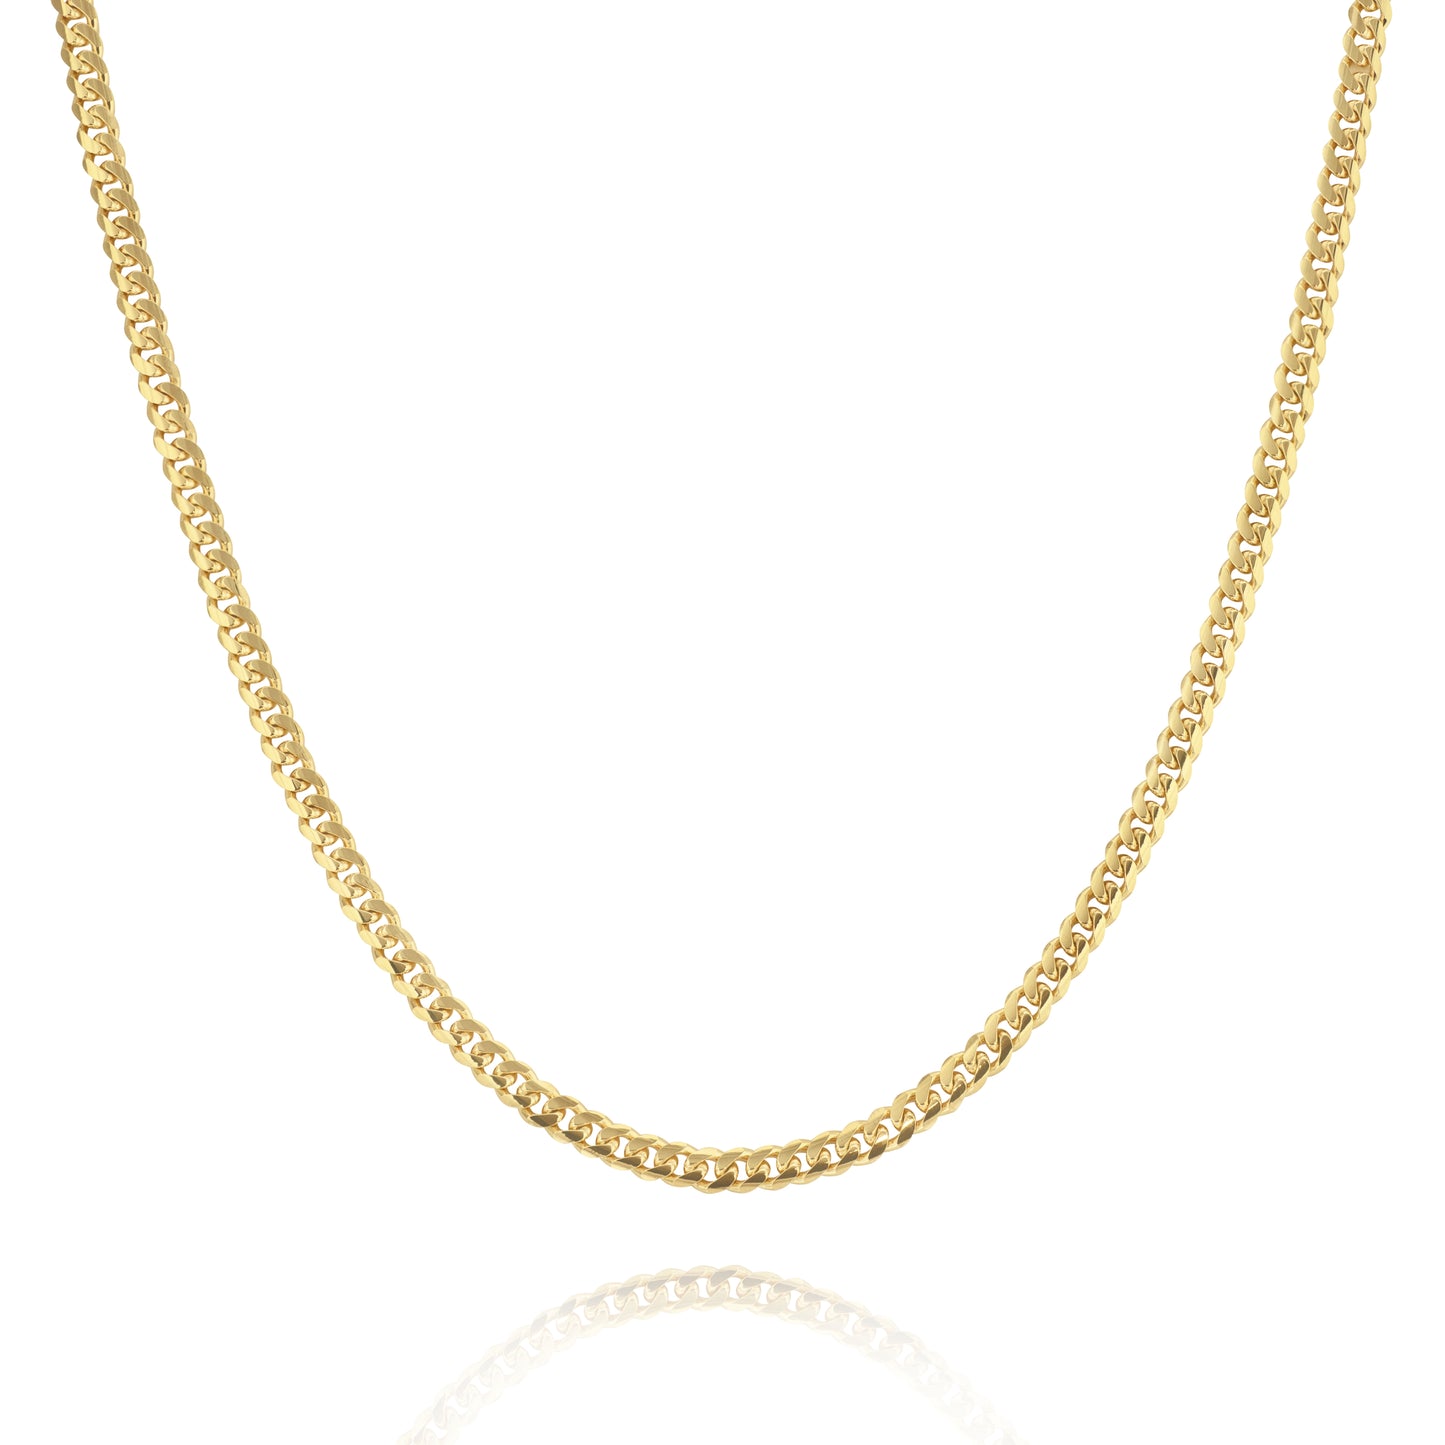 10K Yellow Gold Cuban Link Chain 4.5Mm 25In 19.2Dwt/ 29.8 G